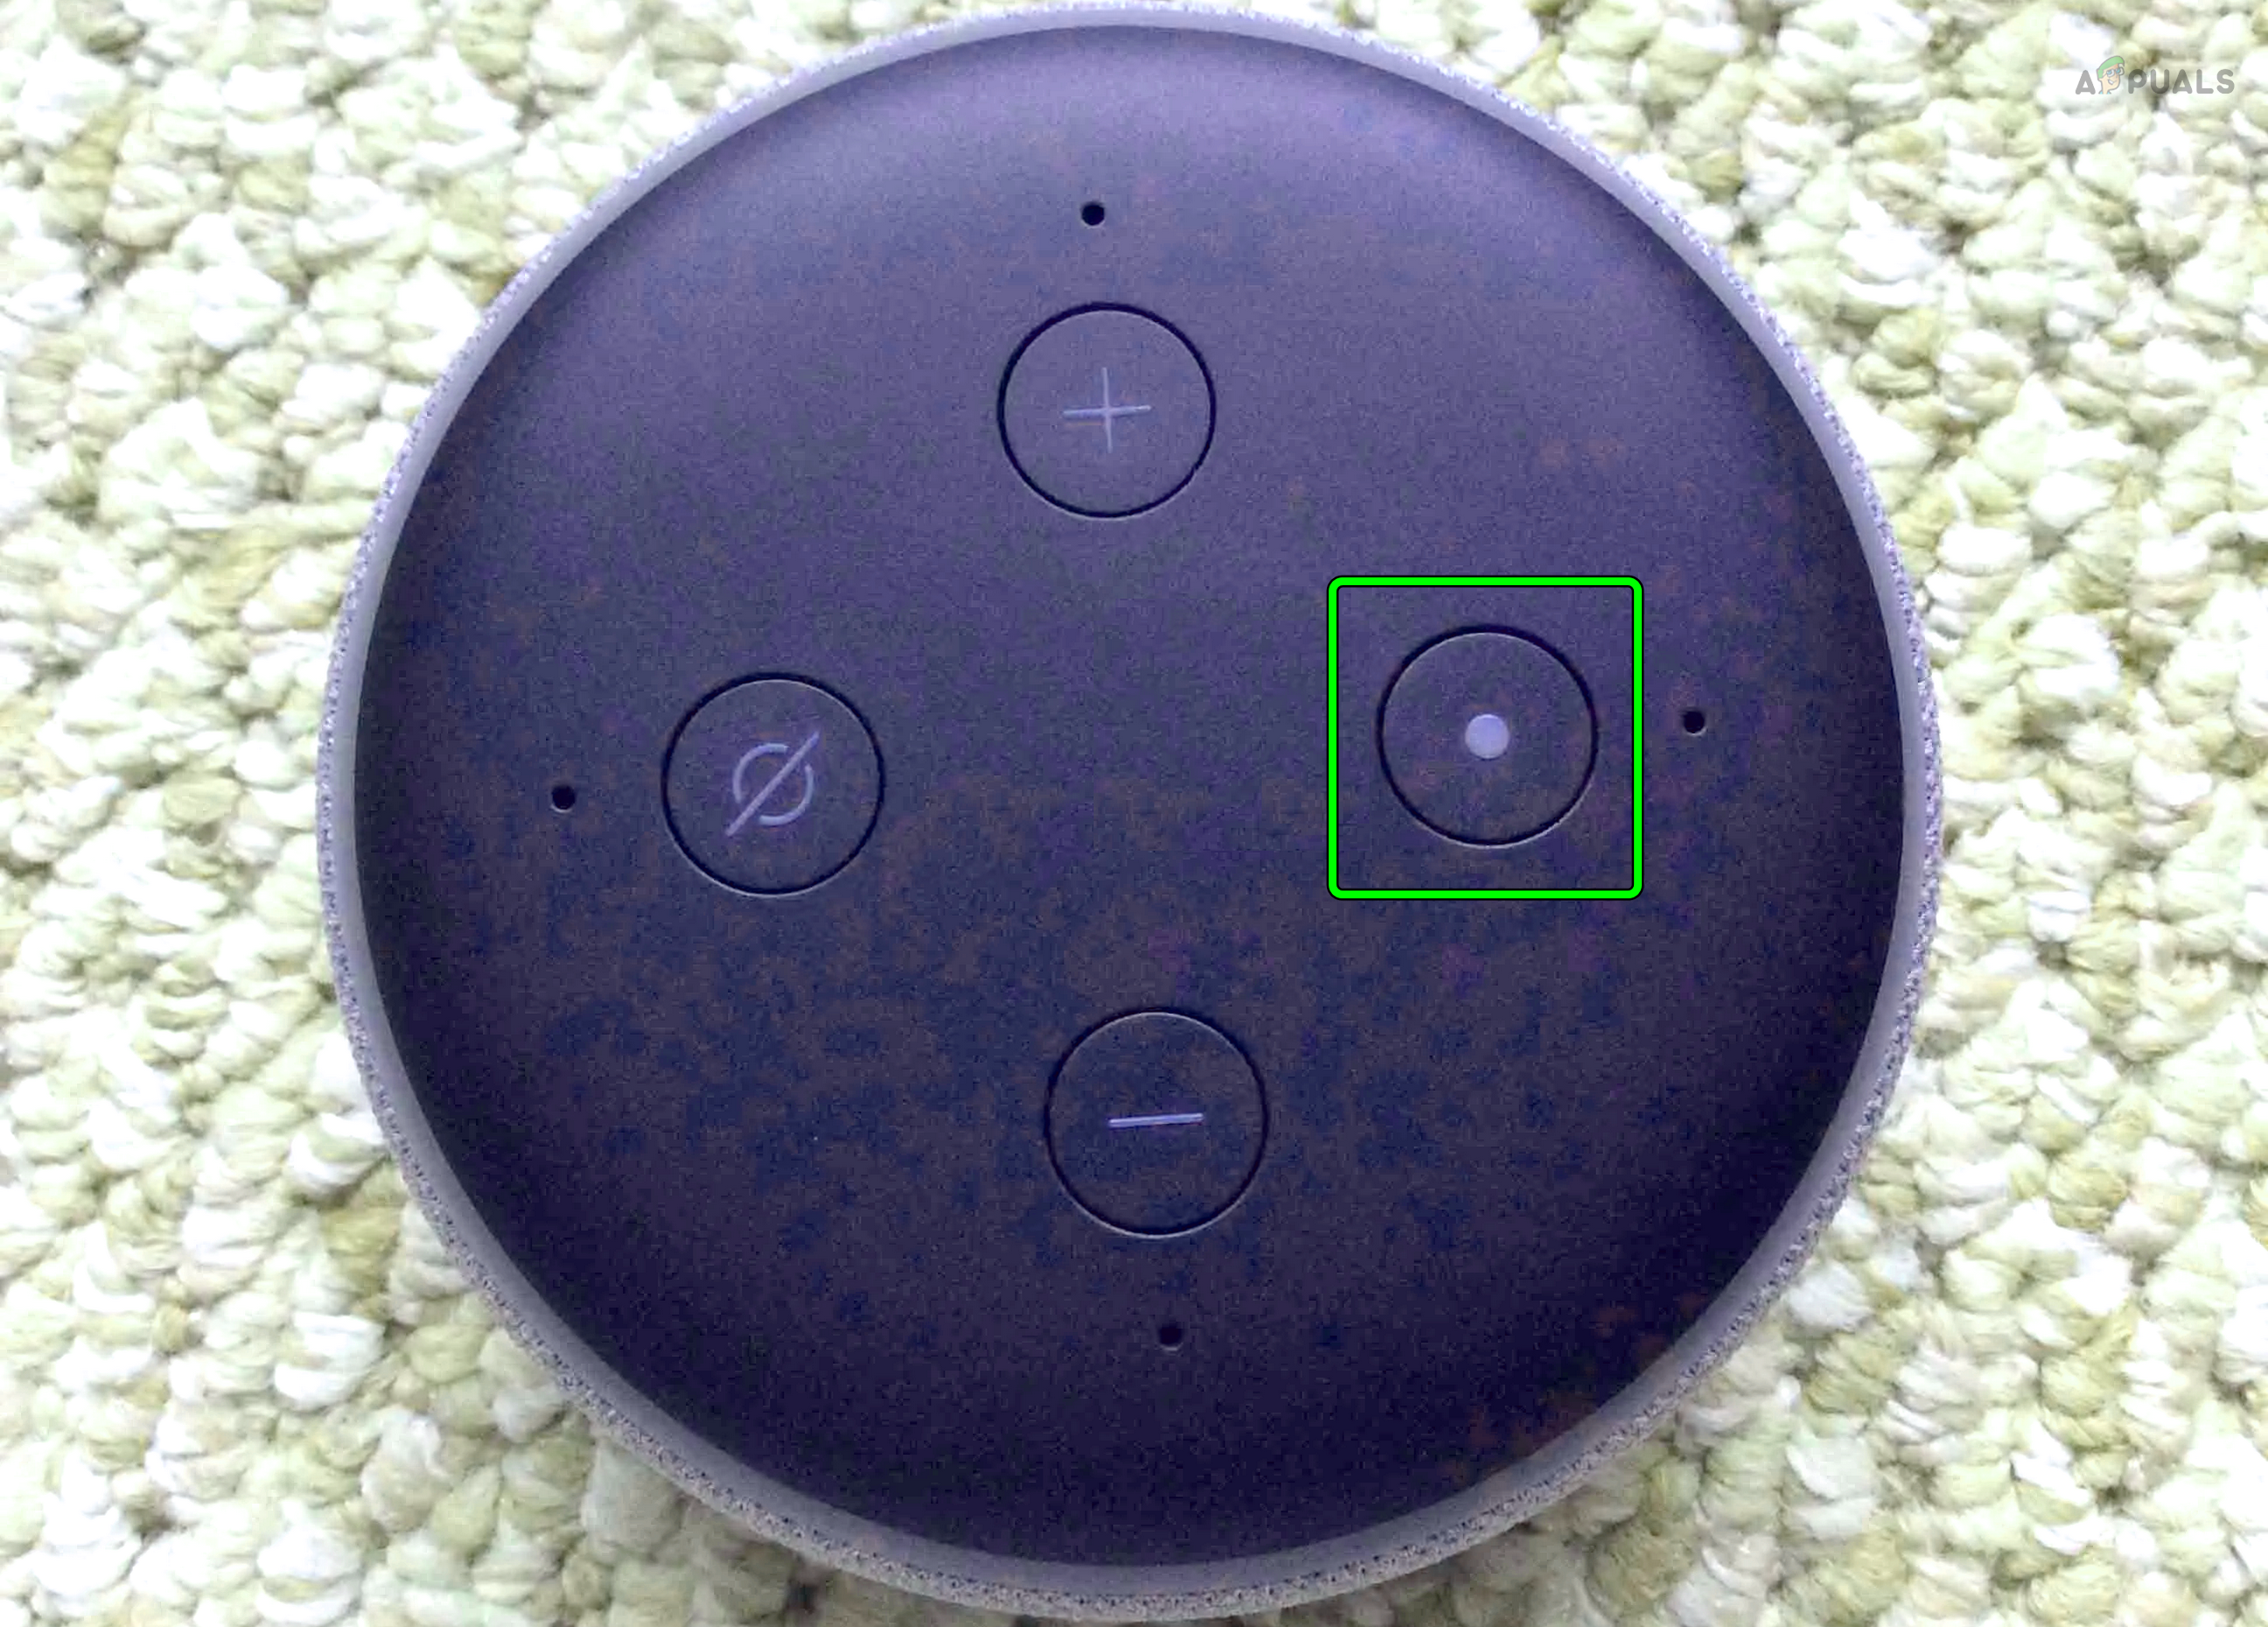 Reset the Echo Dot 3rd Generation to the Factory Defaults